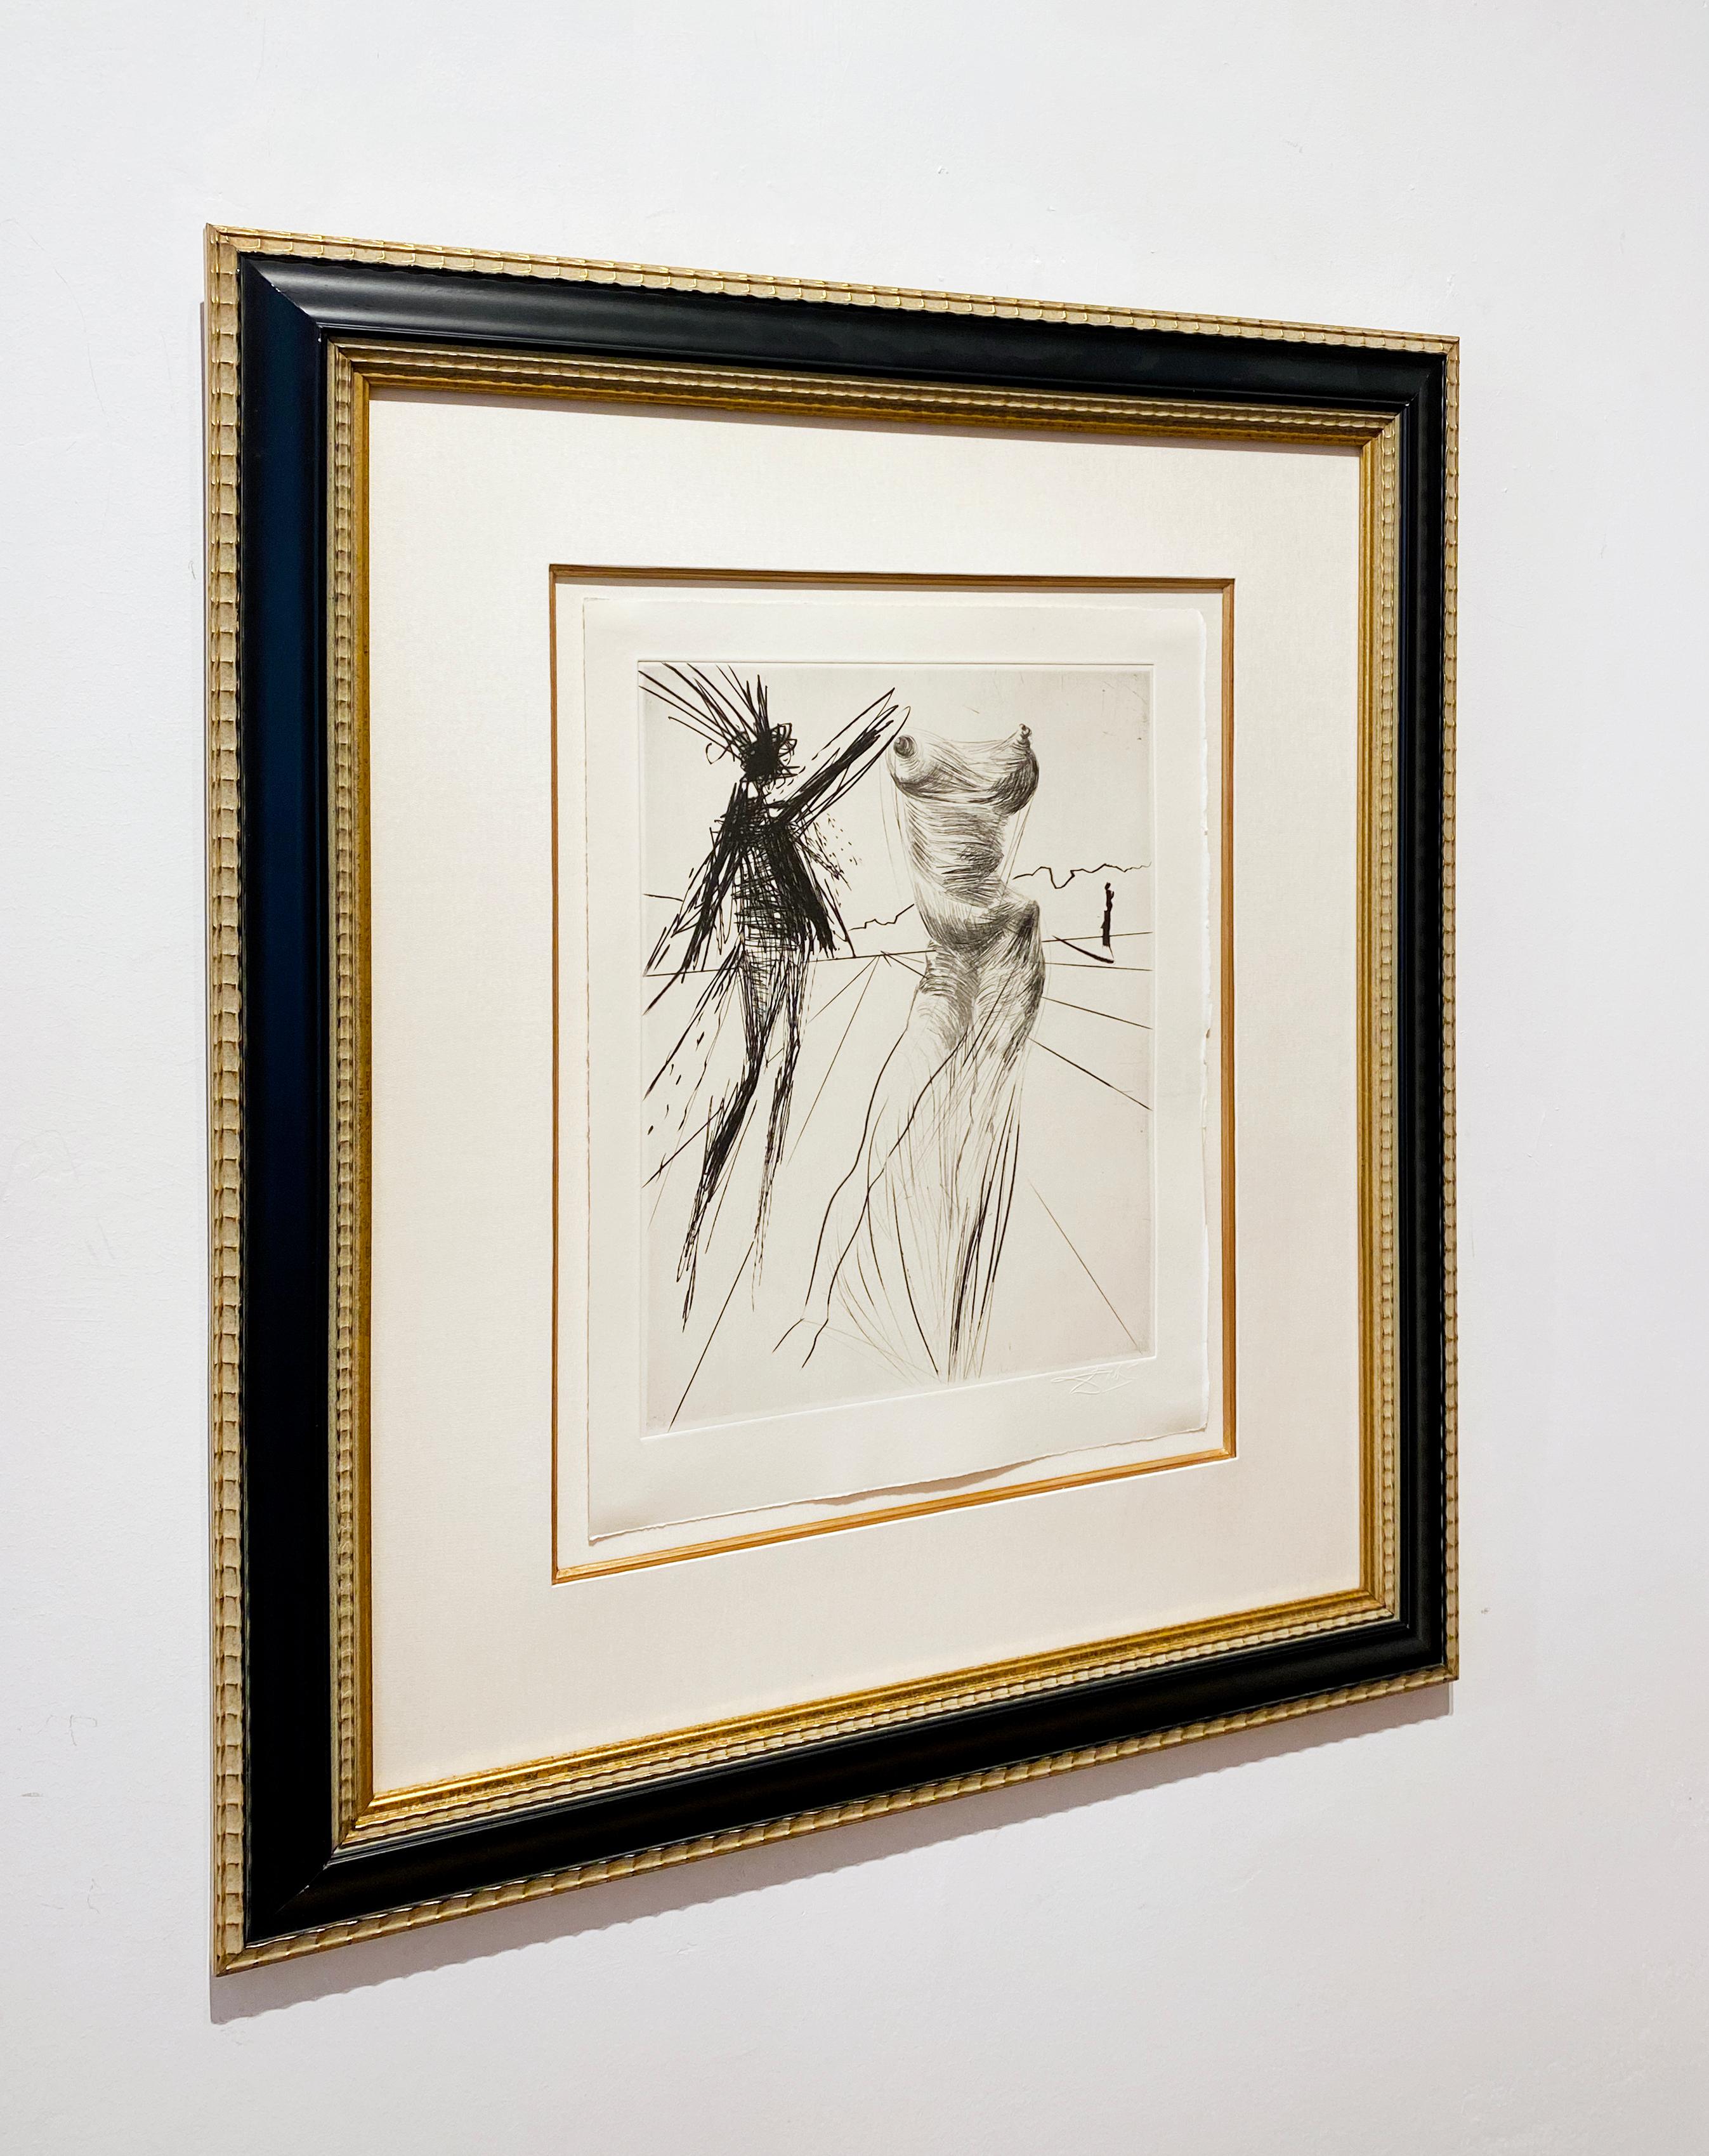 Artist:  Dali, Salvador
Title:  Sator
Series:  Faust
Date:  1969
Medium:  drypoint on arches
Unframed Dimensions:  15.25